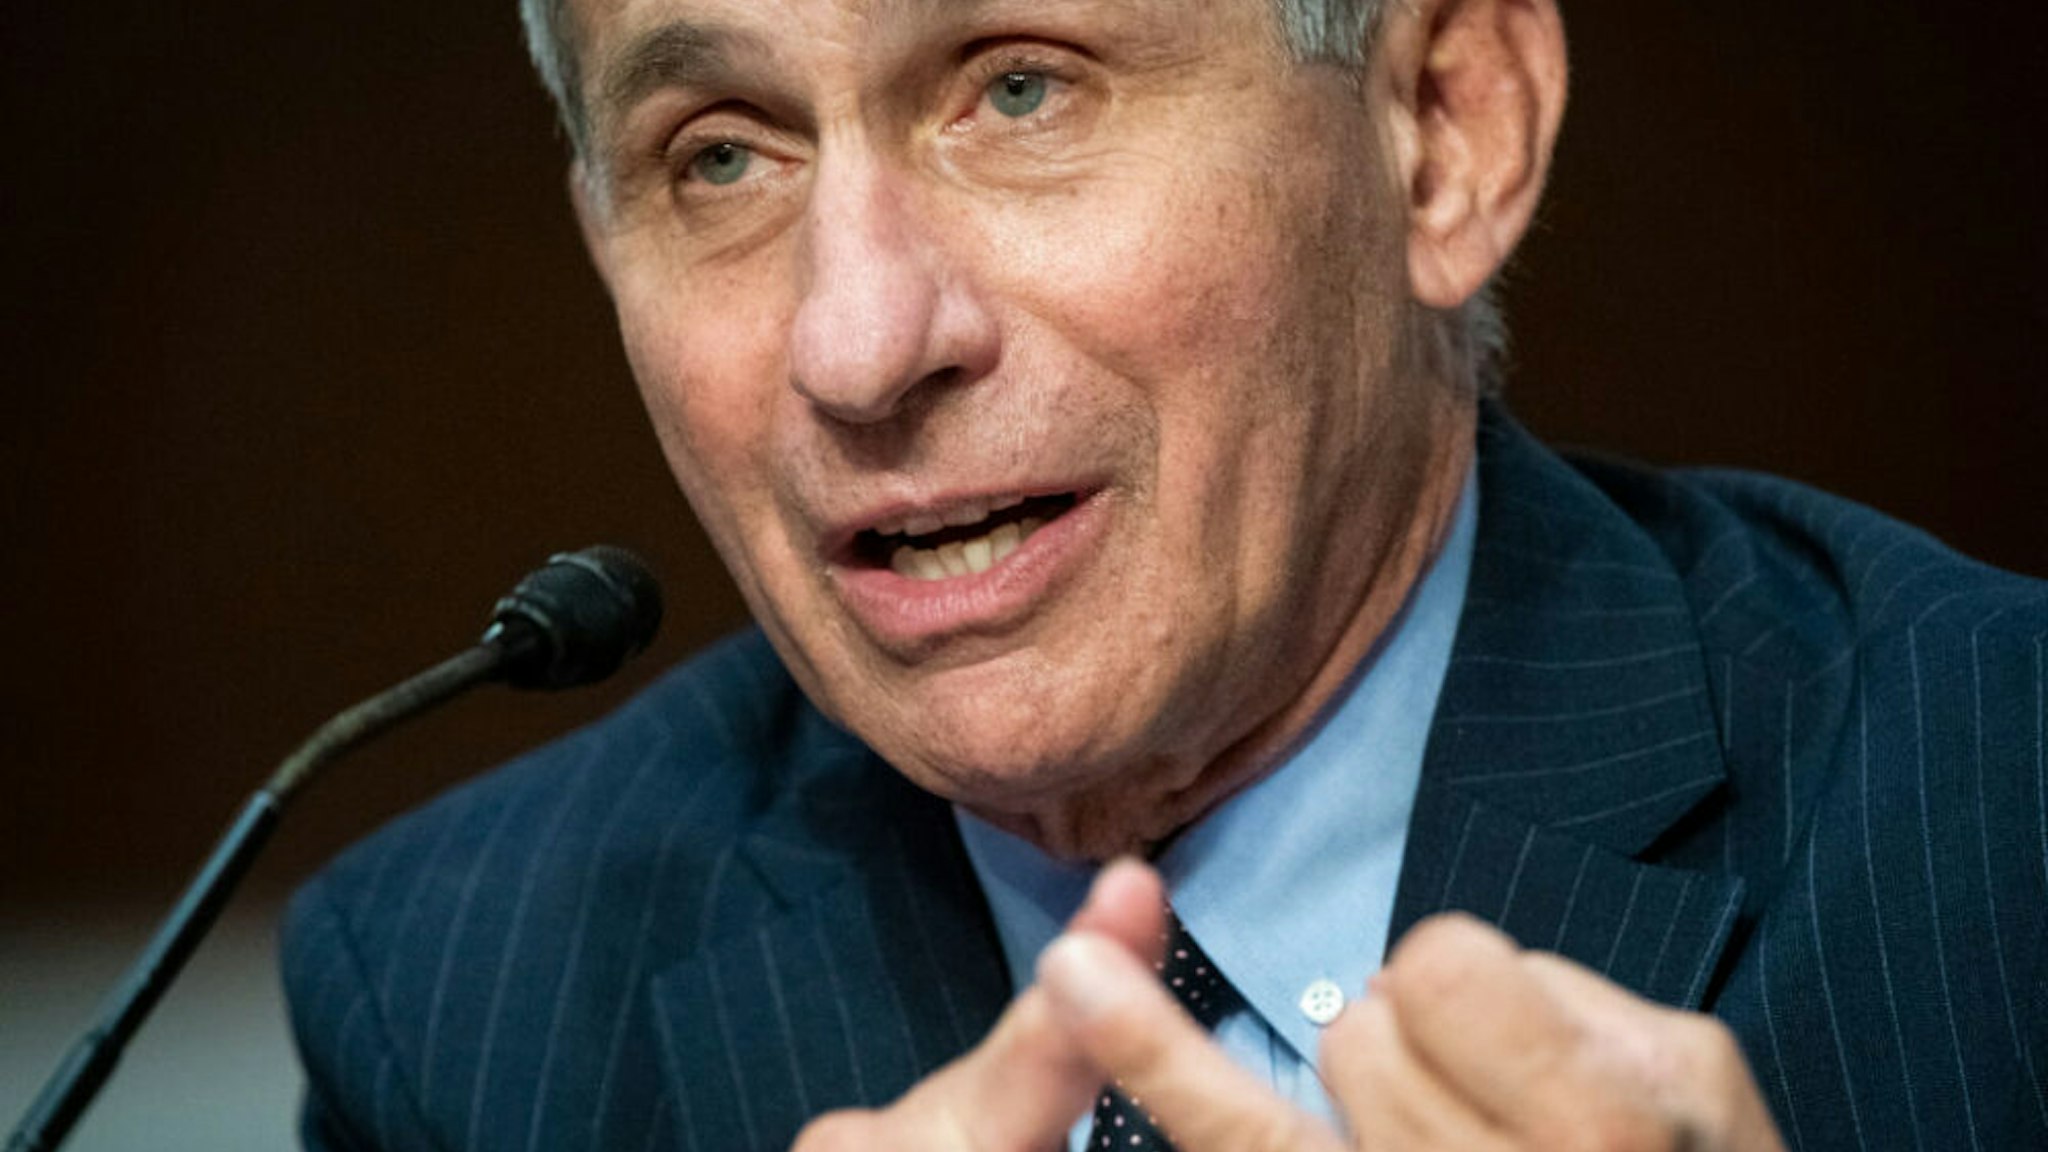 WASHINGTON, DC - JUNE 30: Dr. Anthony Fauci, director of the National Institute of Allergy and Infectious Diseases, speaks during a Senate Health, Education, Labor and Pensions Committee hearing on June 30, 2020 in Washington, DC. Top federal health officials are expected to discuss efforts for safely getting back to work and school during the coronavirus pandemic.